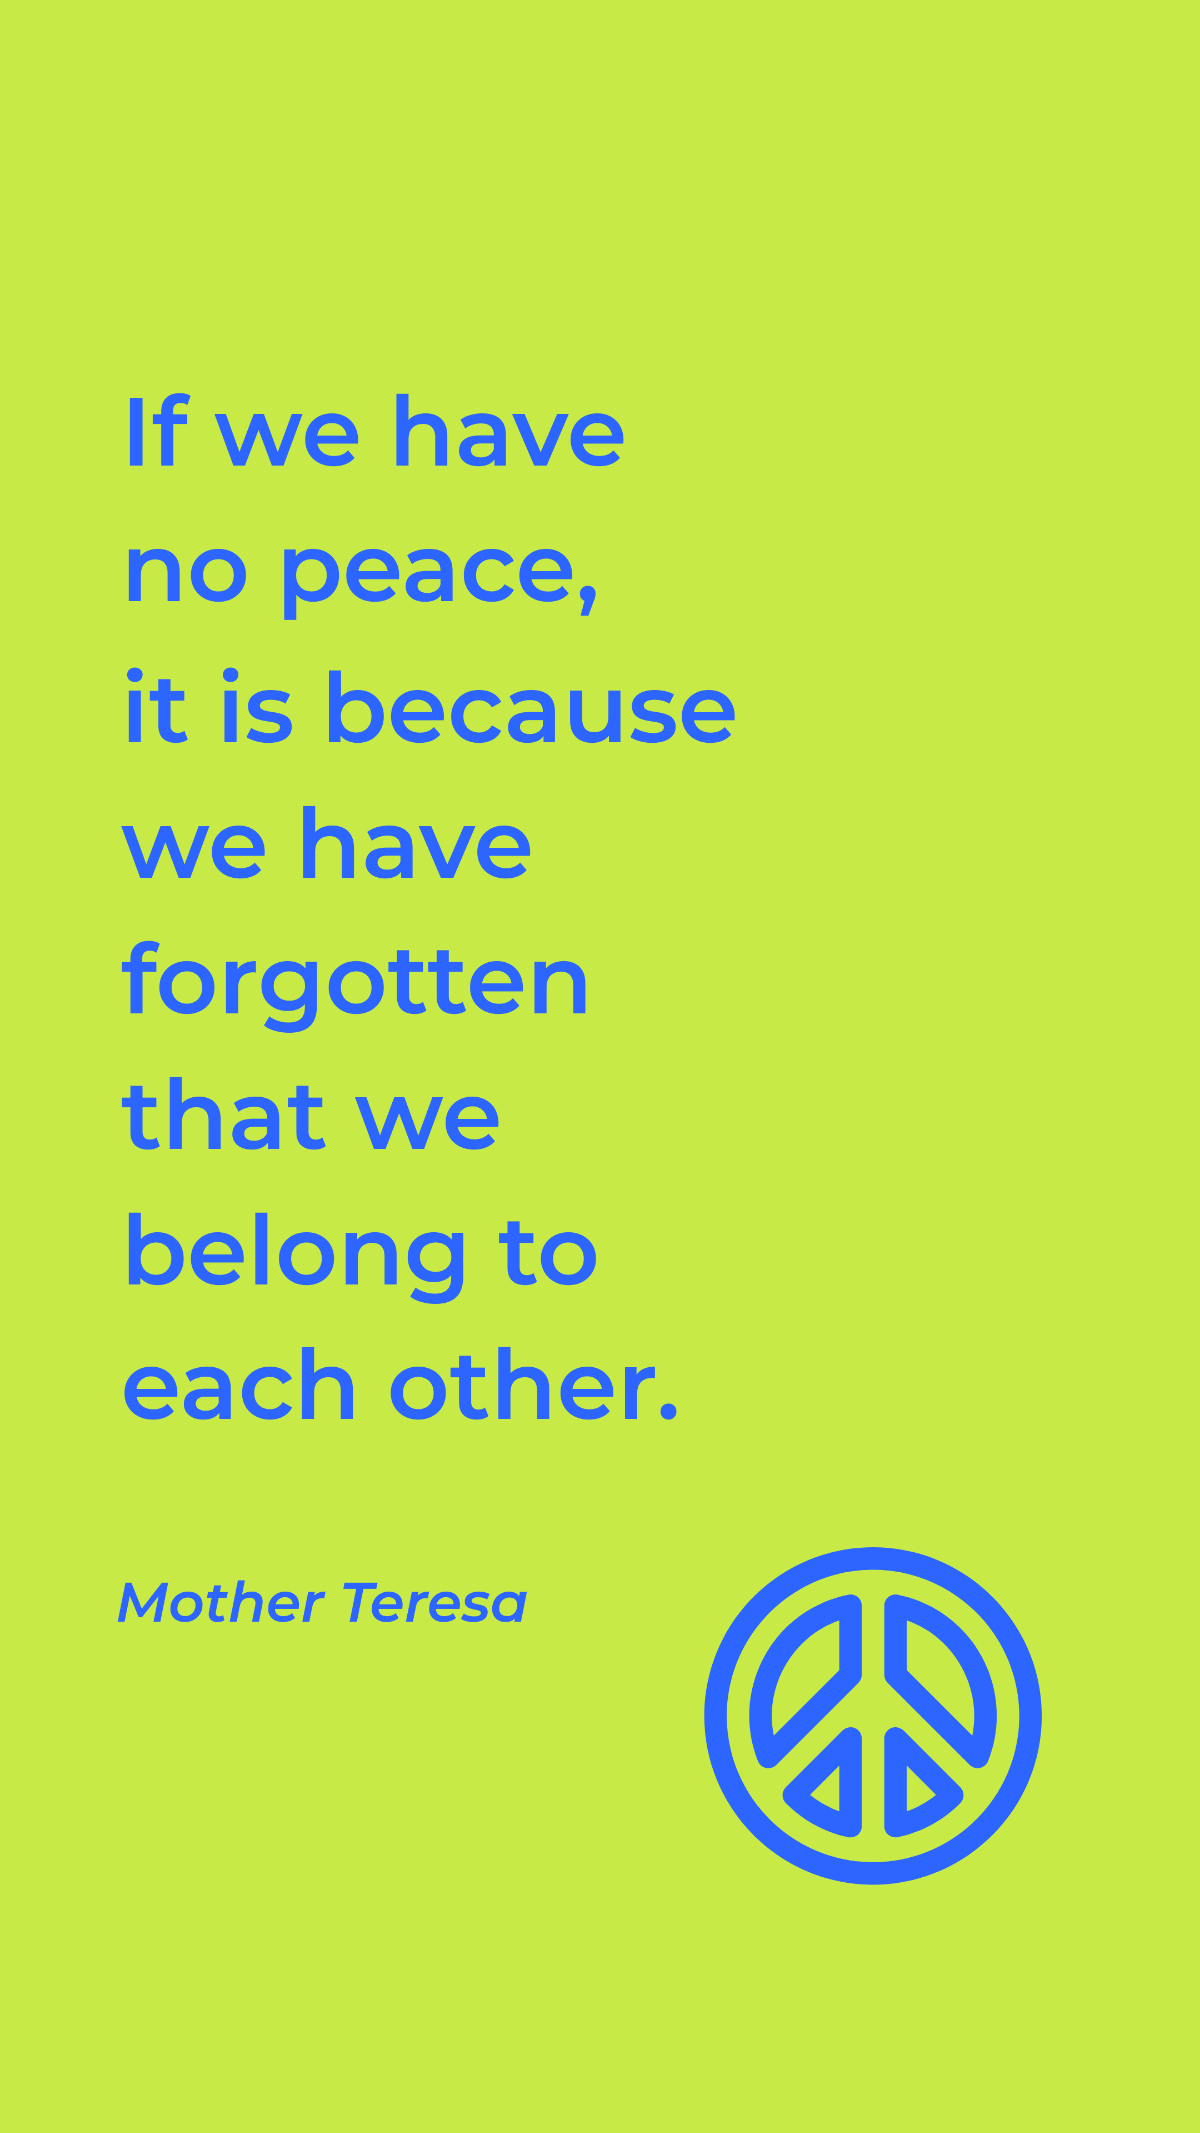 Free Mother Teresa - If we have no peace, it is because we have forgotten that we belong to each other. Template